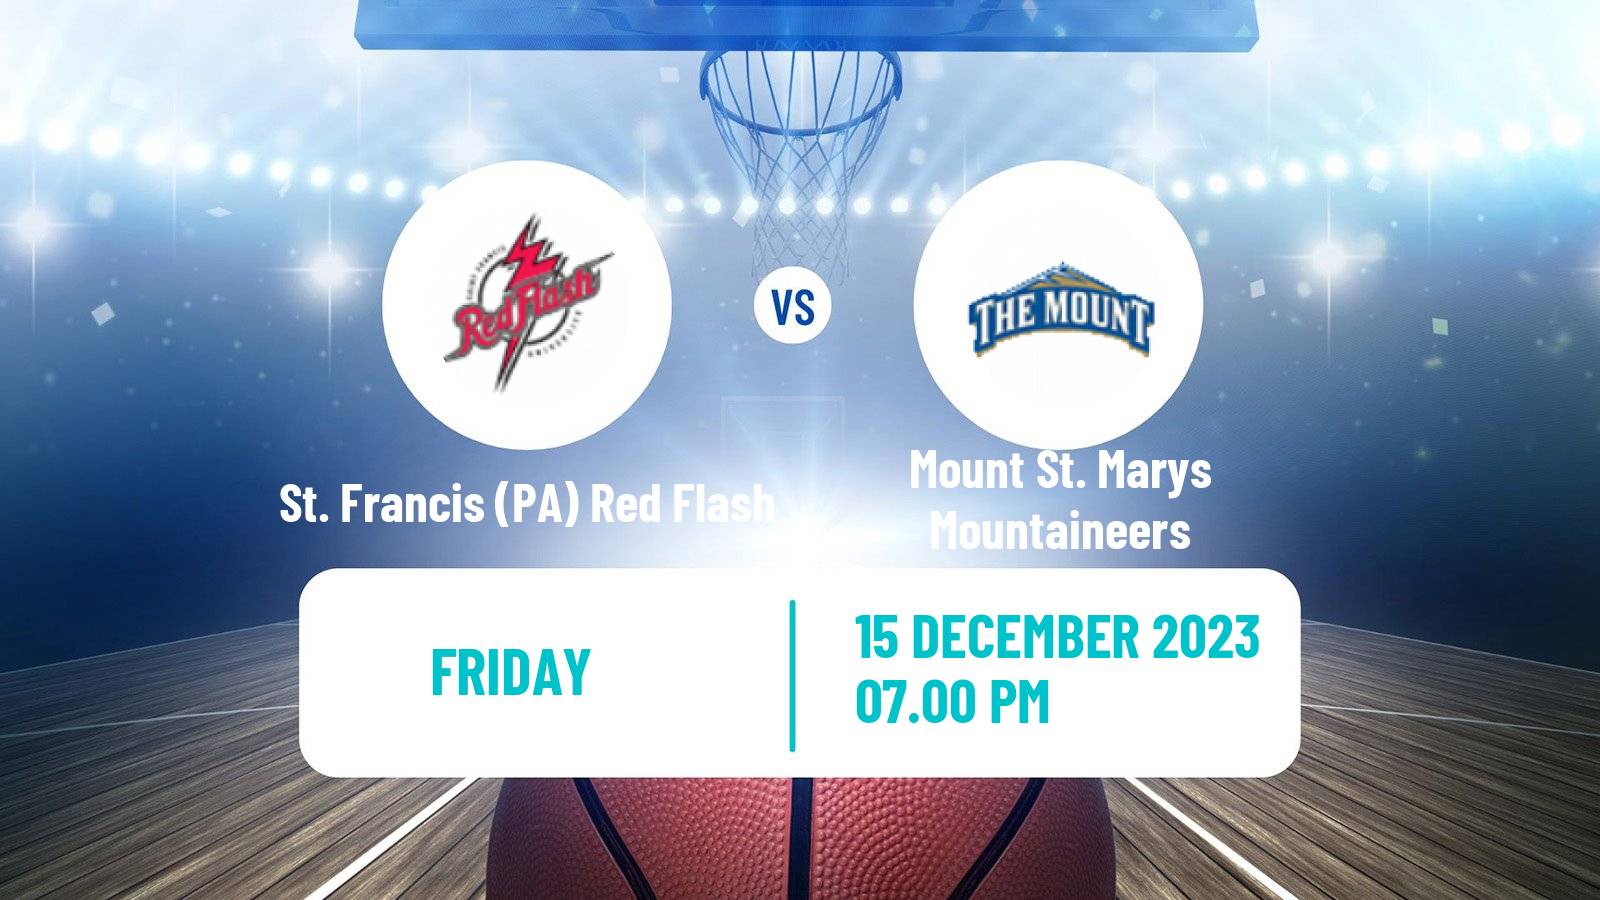 Basketball NCAA College Basketball St. Francis (PA) Red Flash - Mount St. Marys Mountaineers